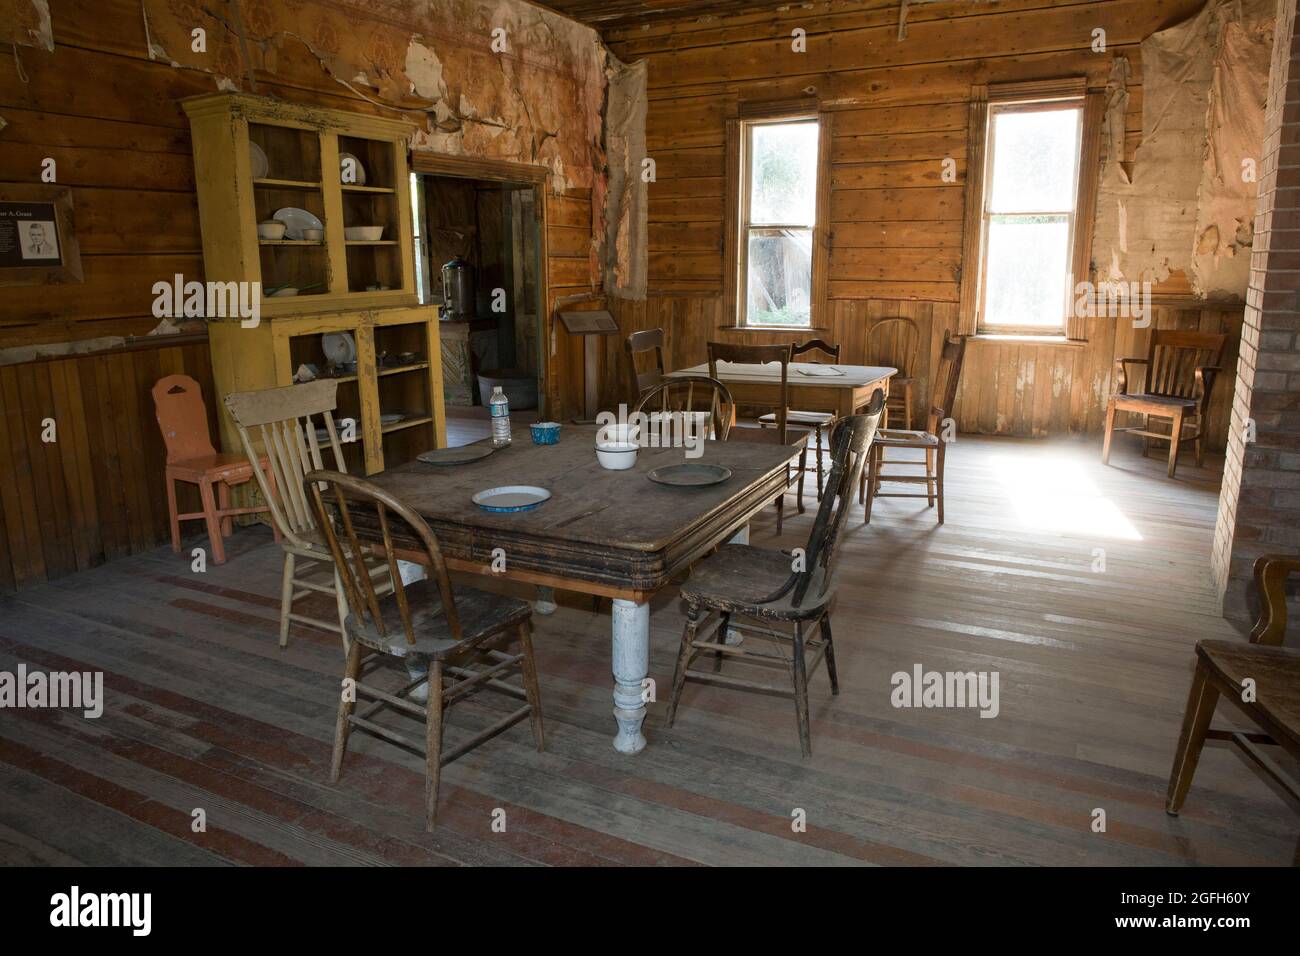 Dining room in the Wells Hotel, the largest and most elaborate building still standing in the ghost town, Garnet, MT. Stock Photo